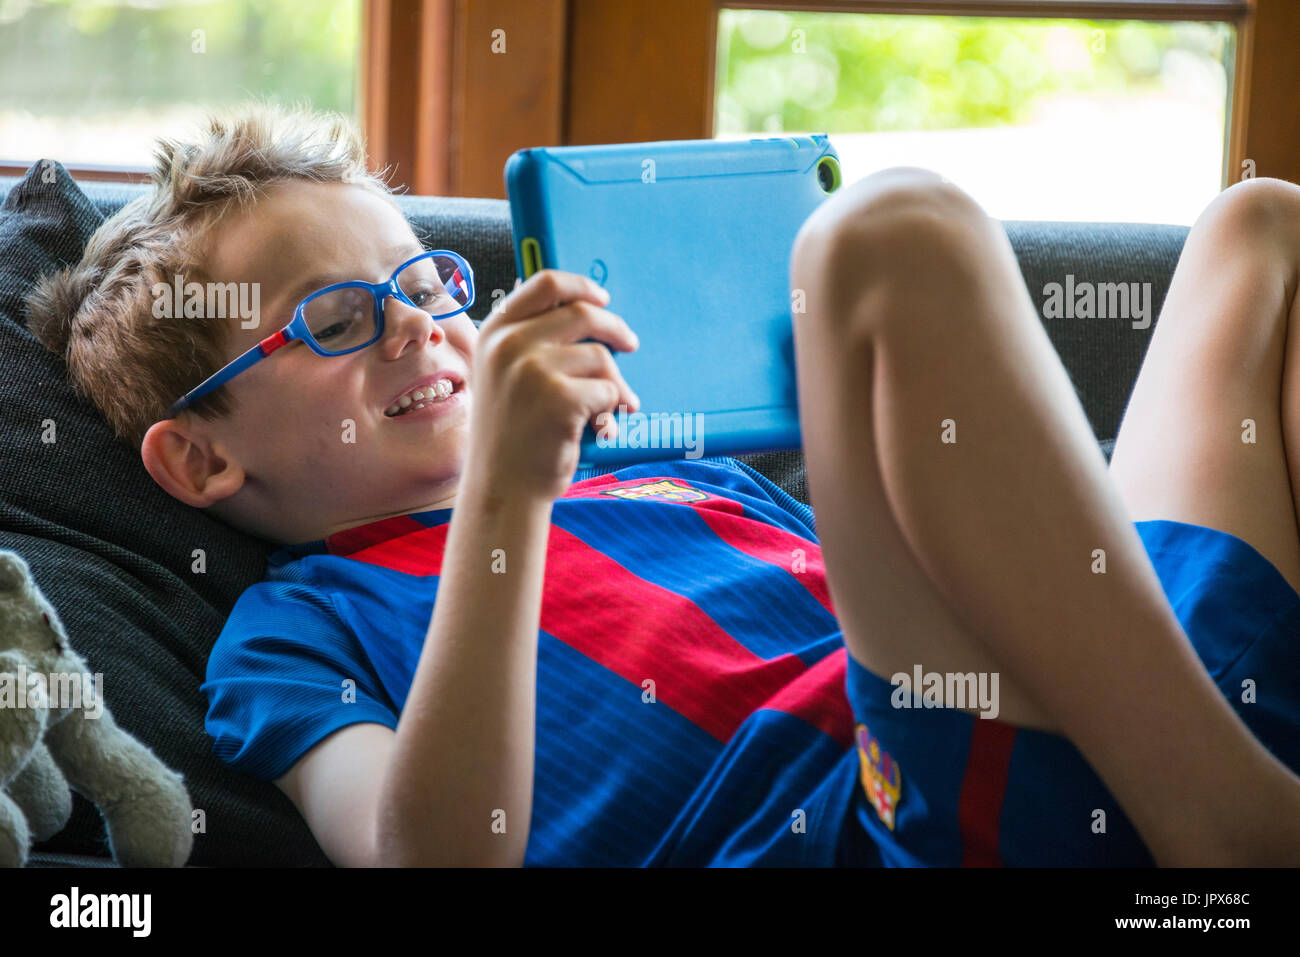 Young Boy, 6 years, playing games on tablet, close-up Stock Photo